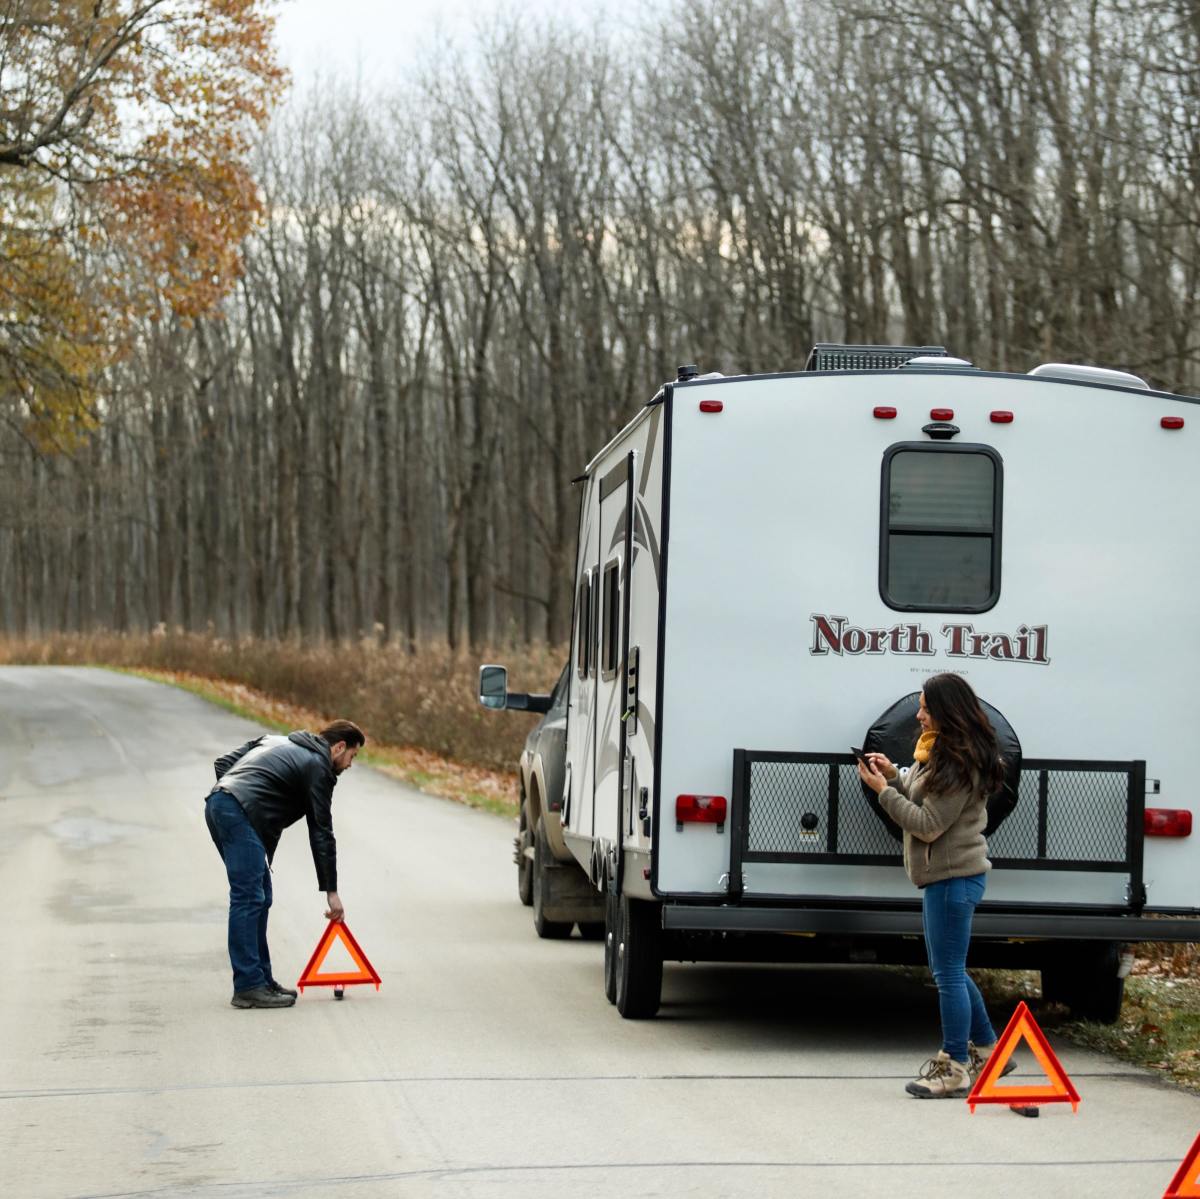 RV repair costs are high. This article gives you some idea of what you might have to pay for parts and labor along with tips for reducing costs.